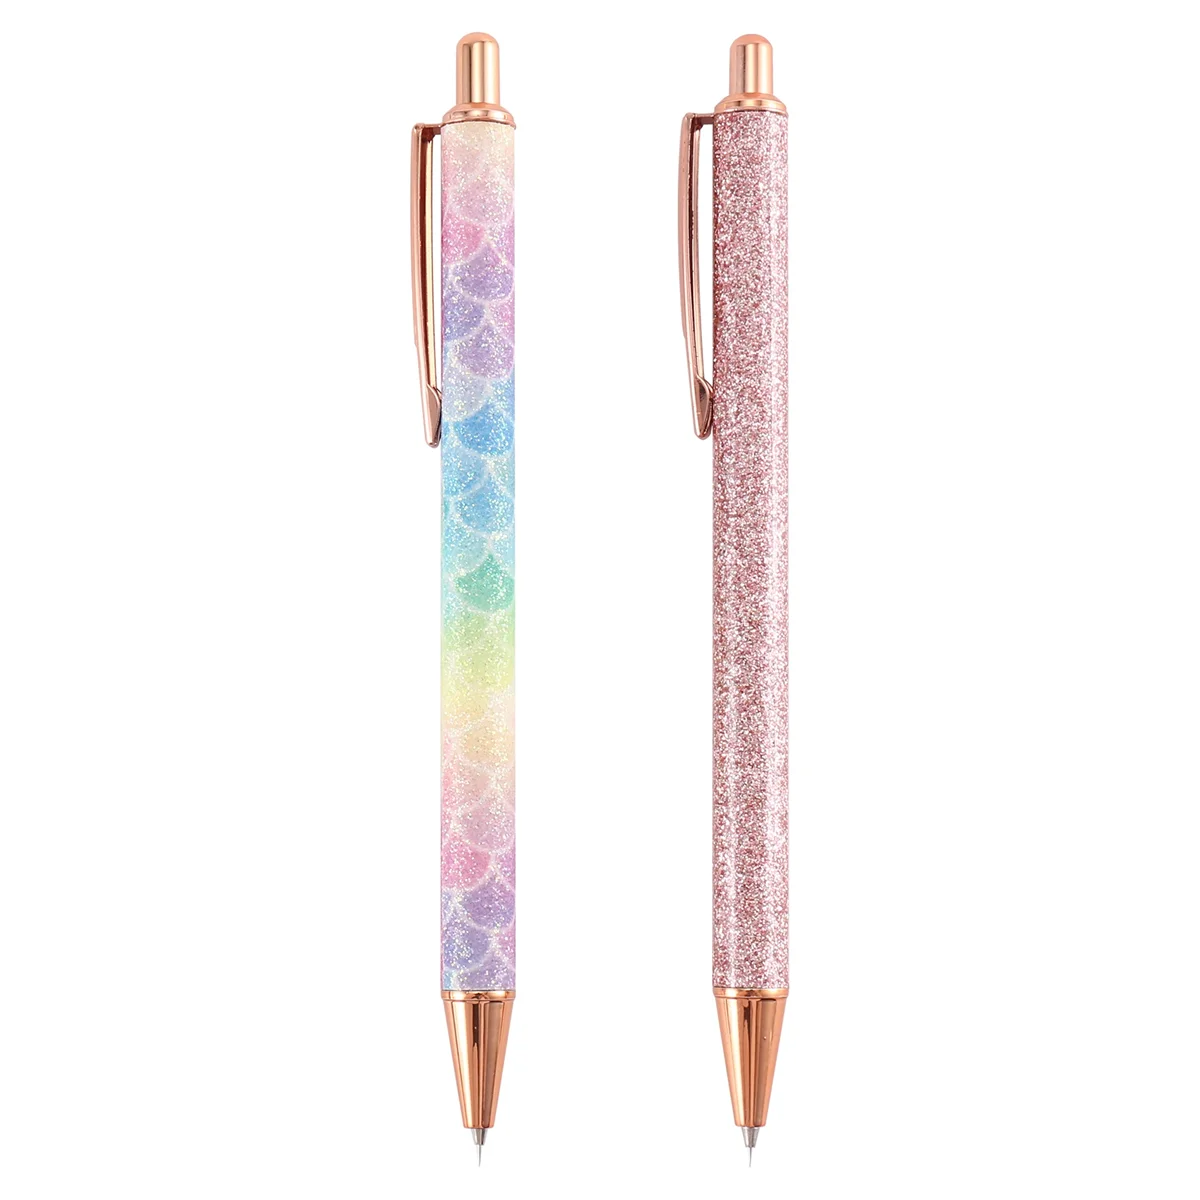 

2 Pcs Glitter Weeding Pen Fine Point Pin Pen Weeding Tool for Vinyl Air Release Pen for Easy Craft Vinyl Projects